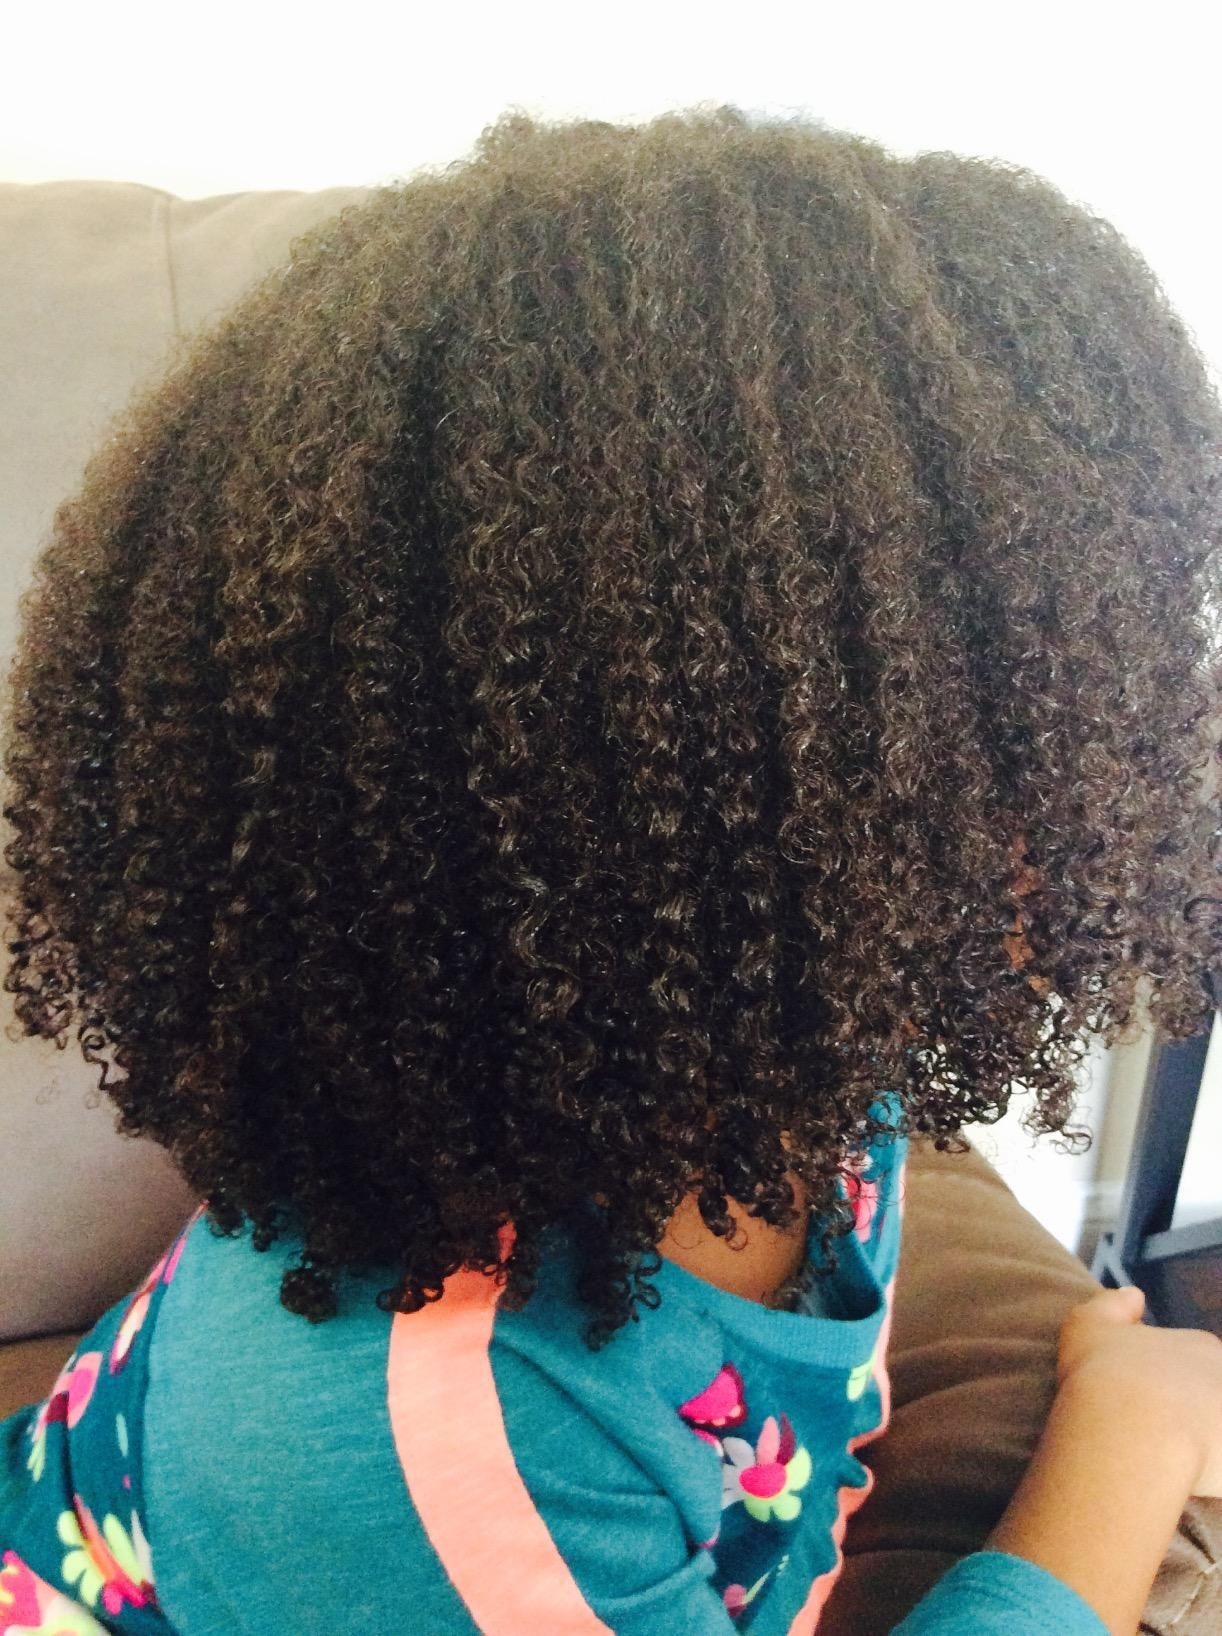 Reviewer with natural hair who used the conditioner to get curl definition and shine